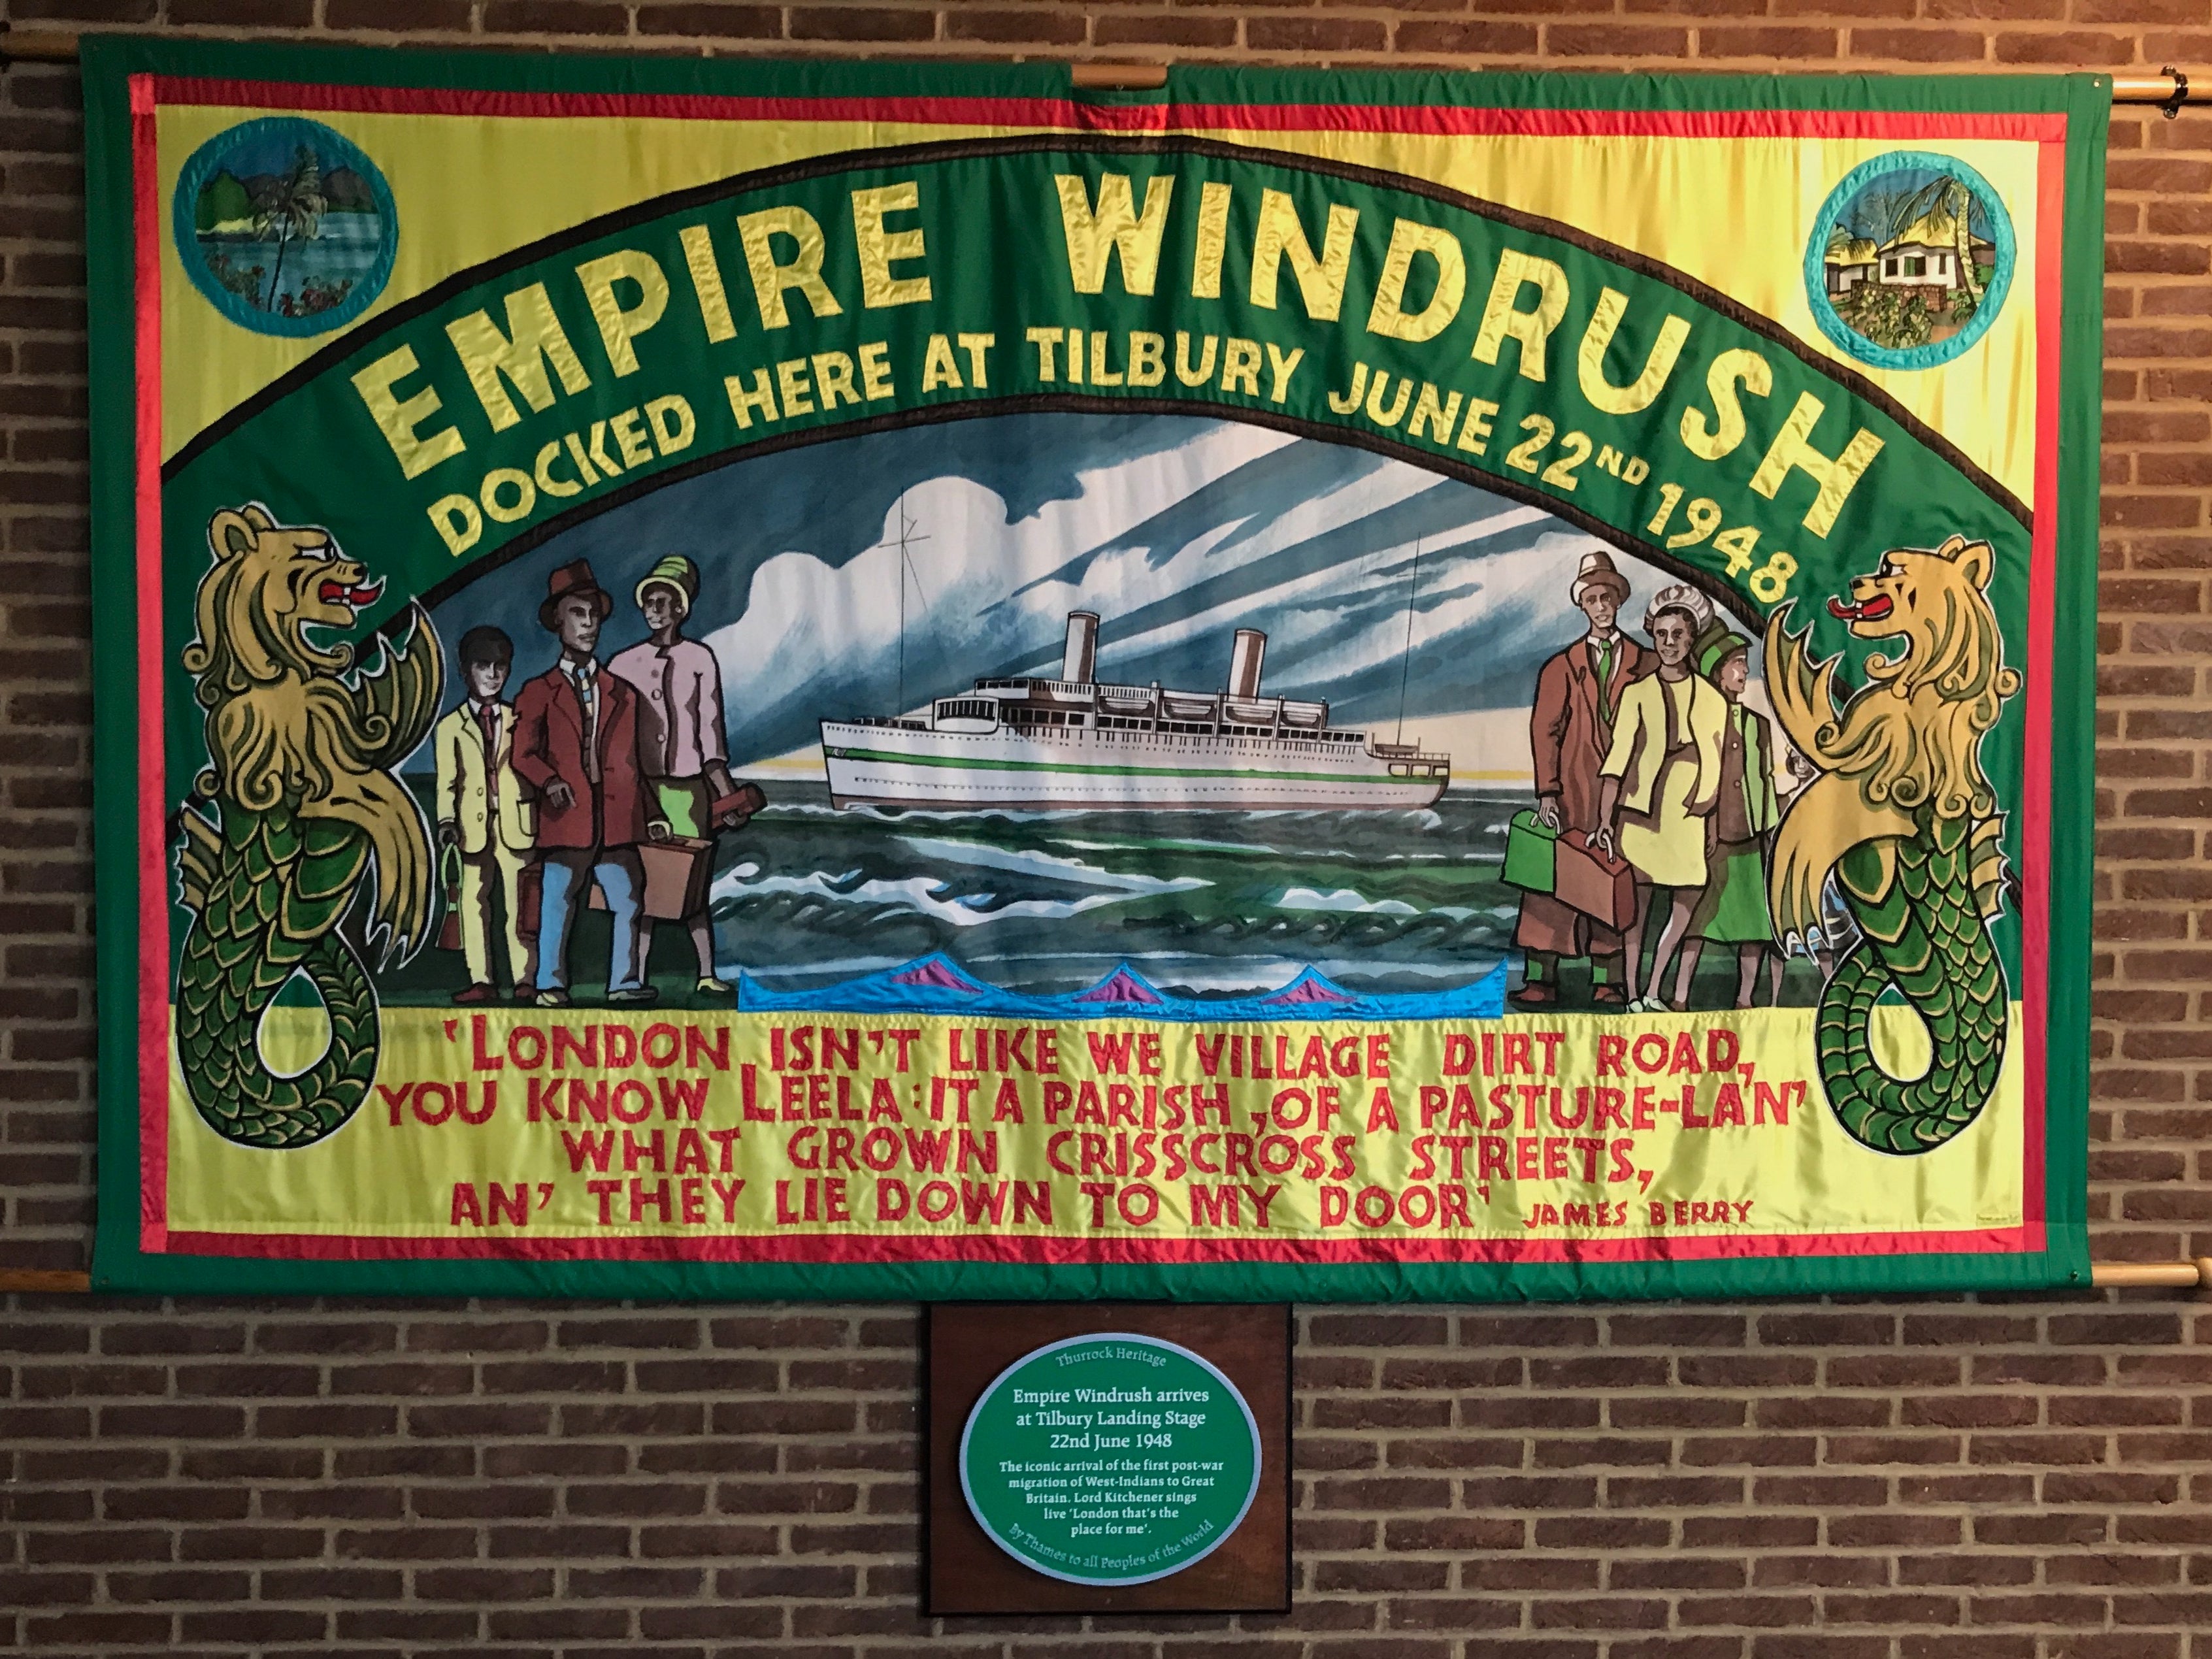 A Windrush mural and plaque in Tilbury